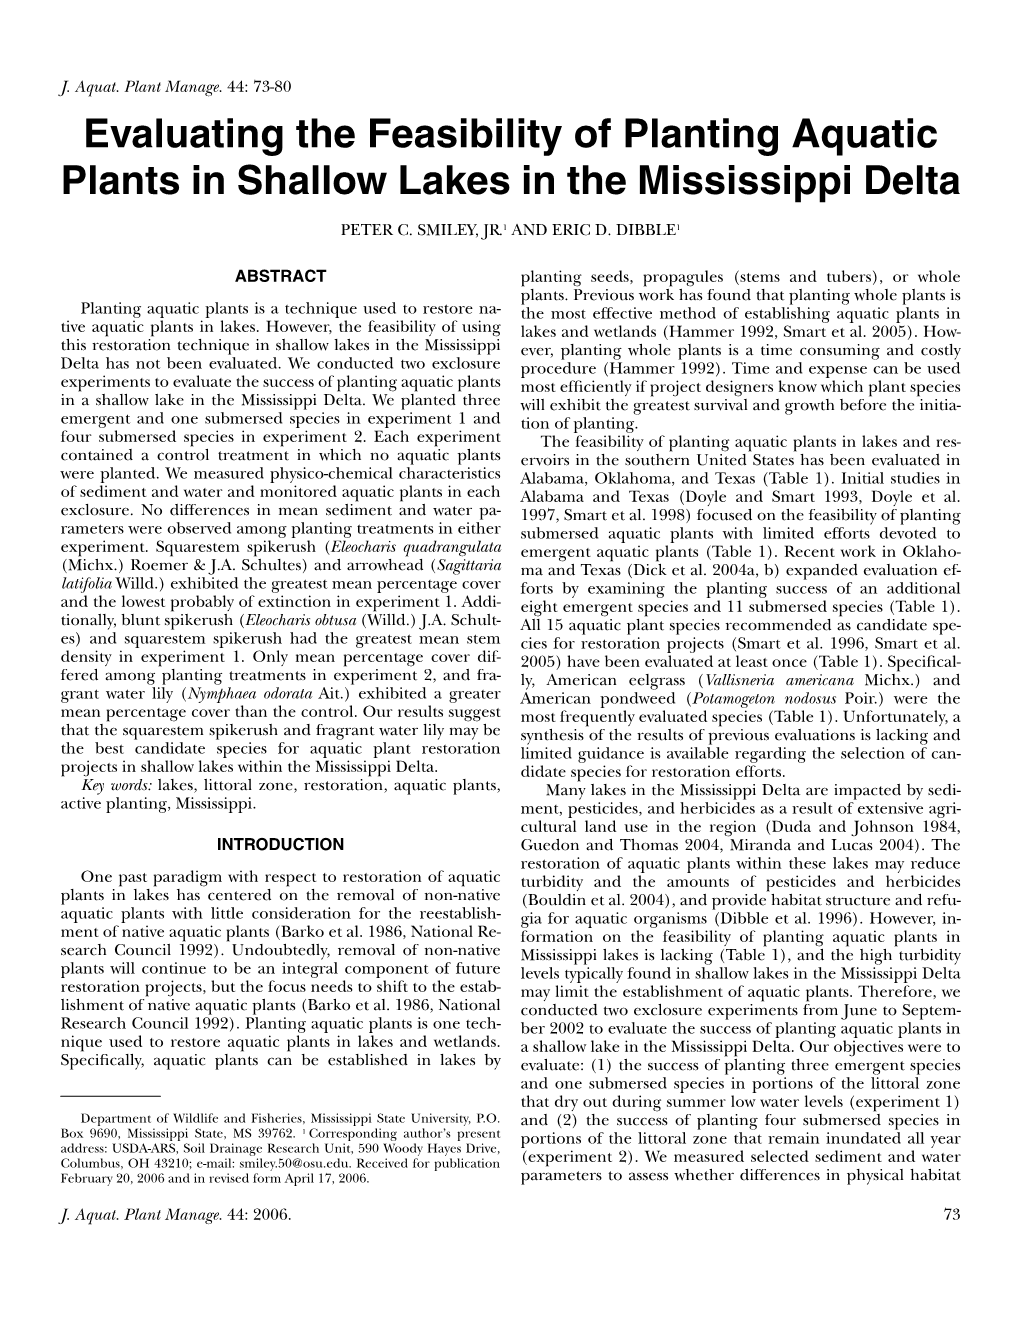 Evaluating the Feasibility of Planting Aquatic Plants in Shallow Lakes in the Mississippi Delta